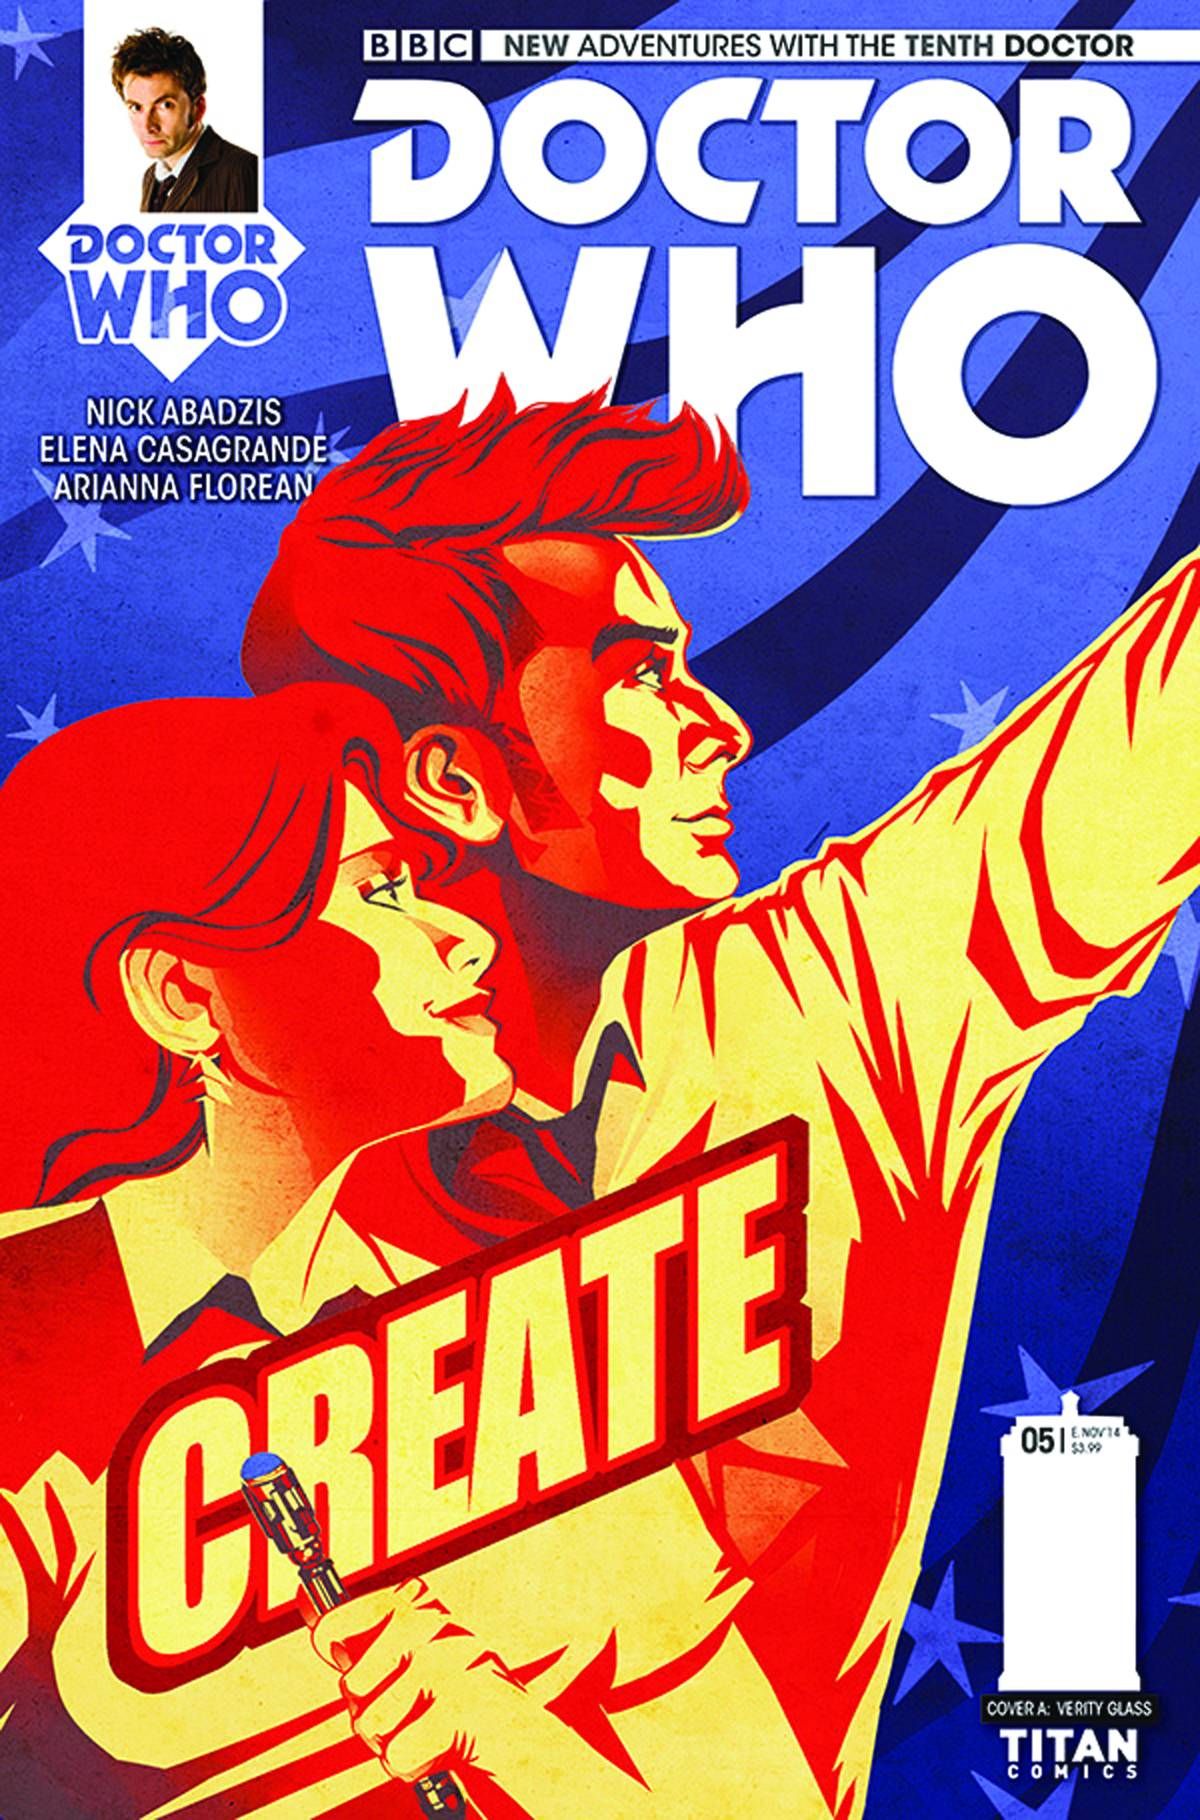 Doctor Who: The Tenth Doctor #5 Comic